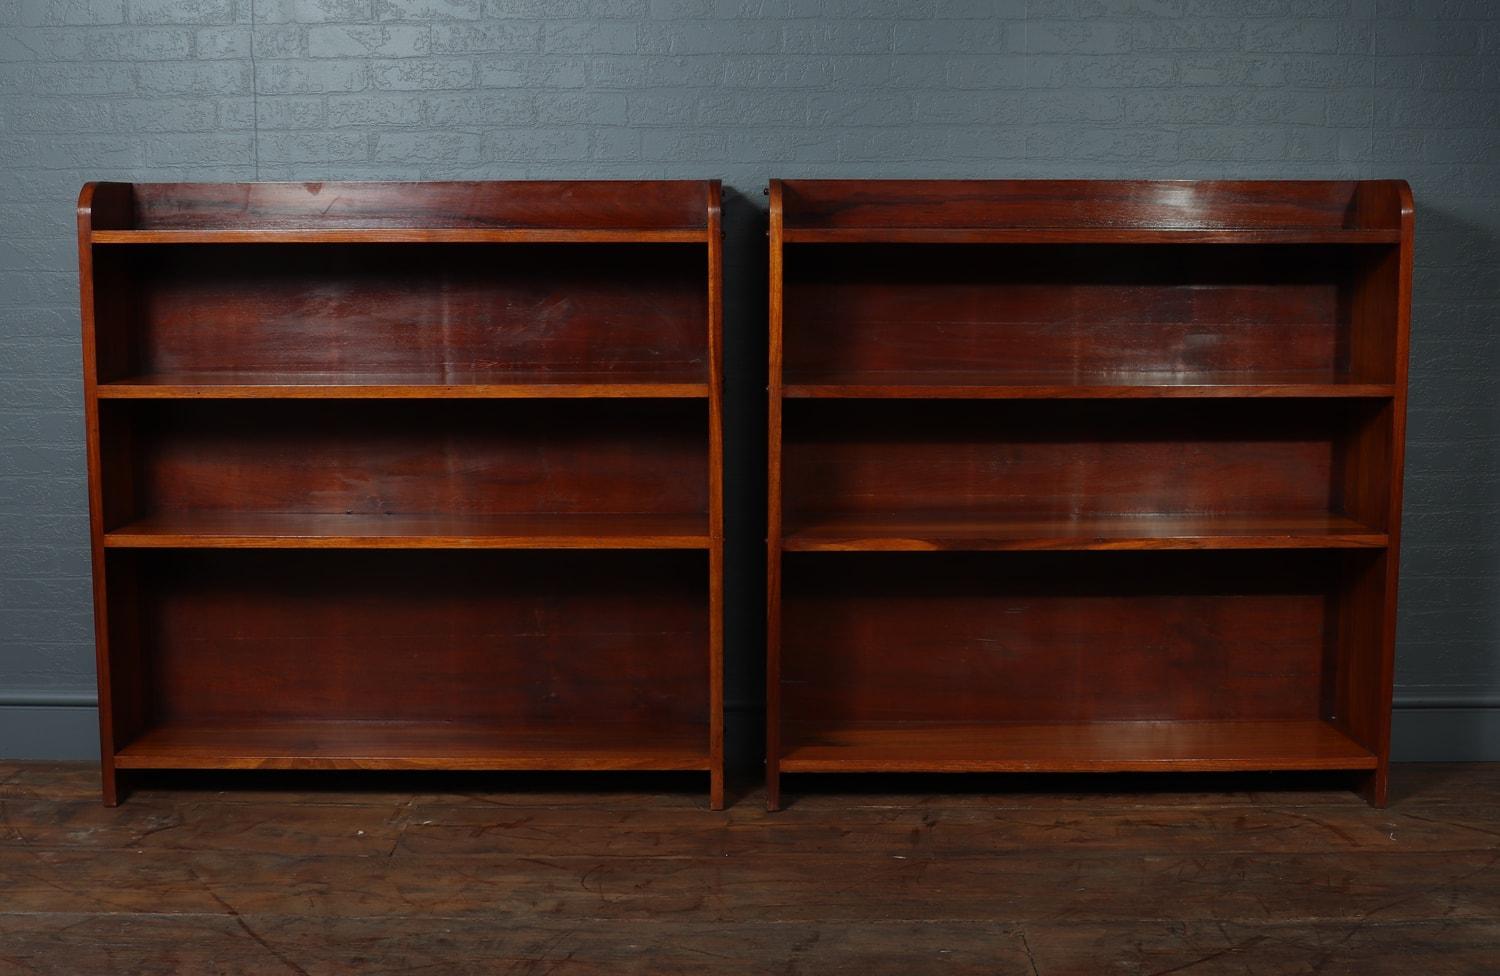 Pair of Midcentury Brazilian Bookcases in Jacaranda In Excellent Condition For Sale In Paddock Wood, Kent